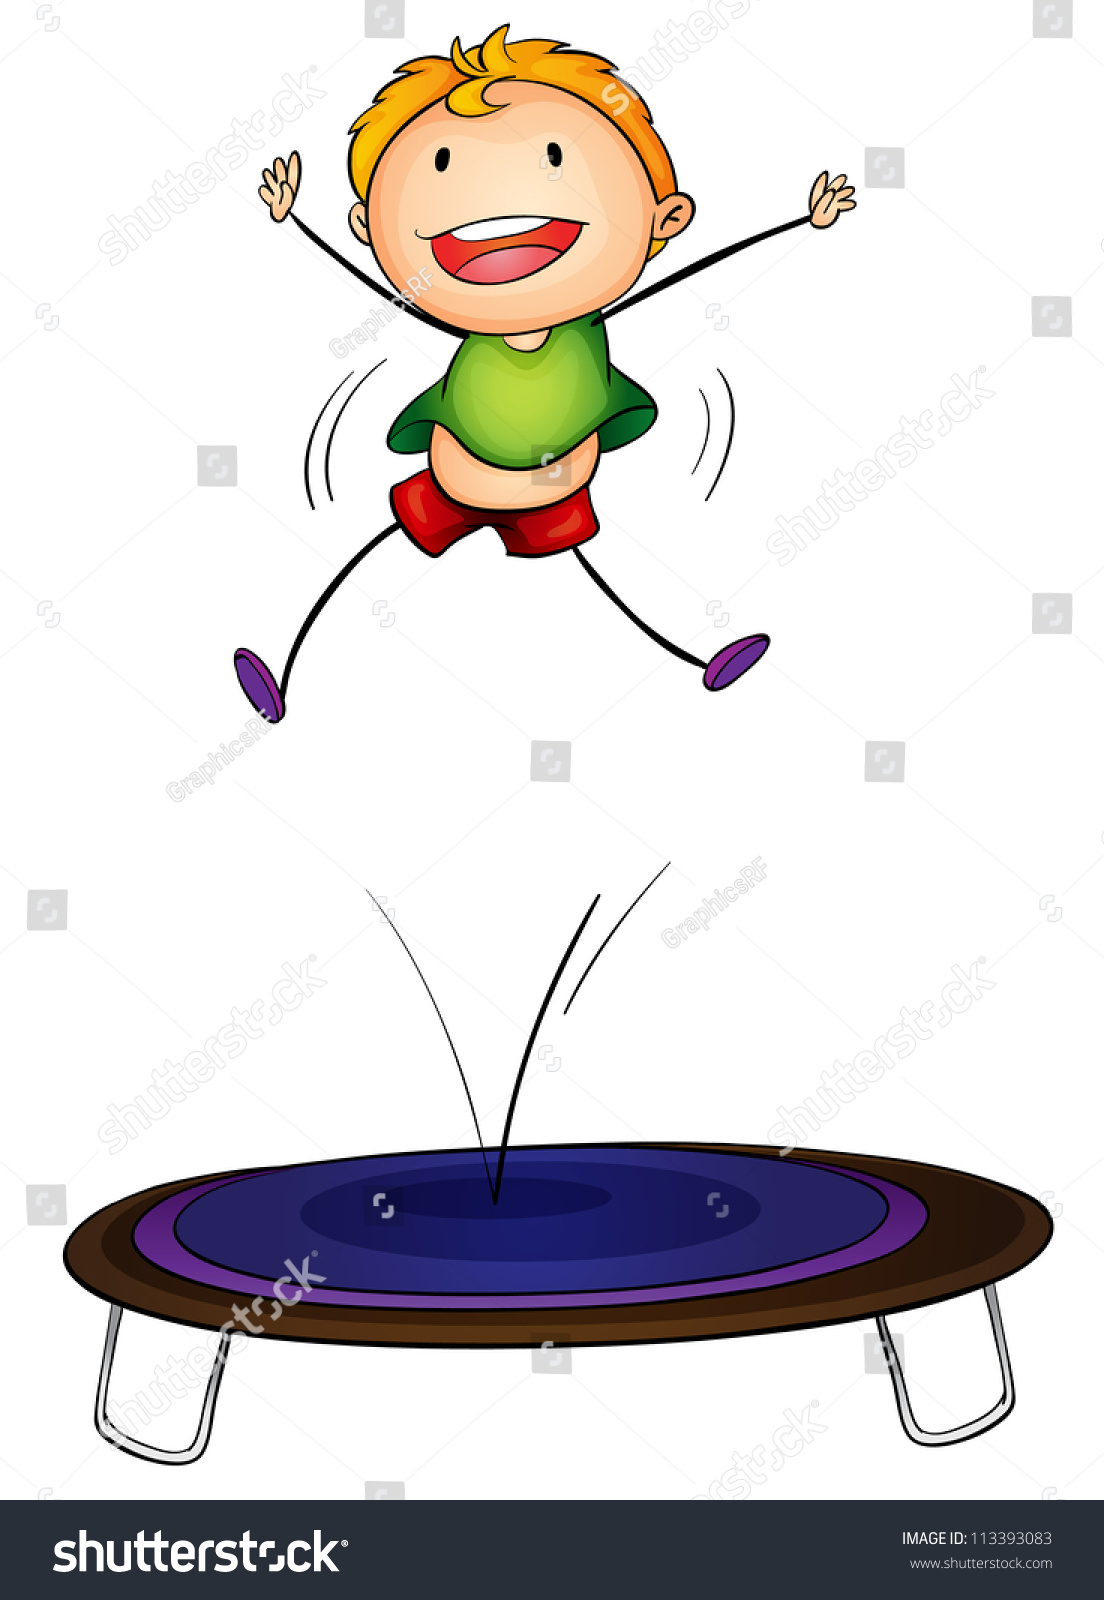 clipart trampoline jumping - photo #24